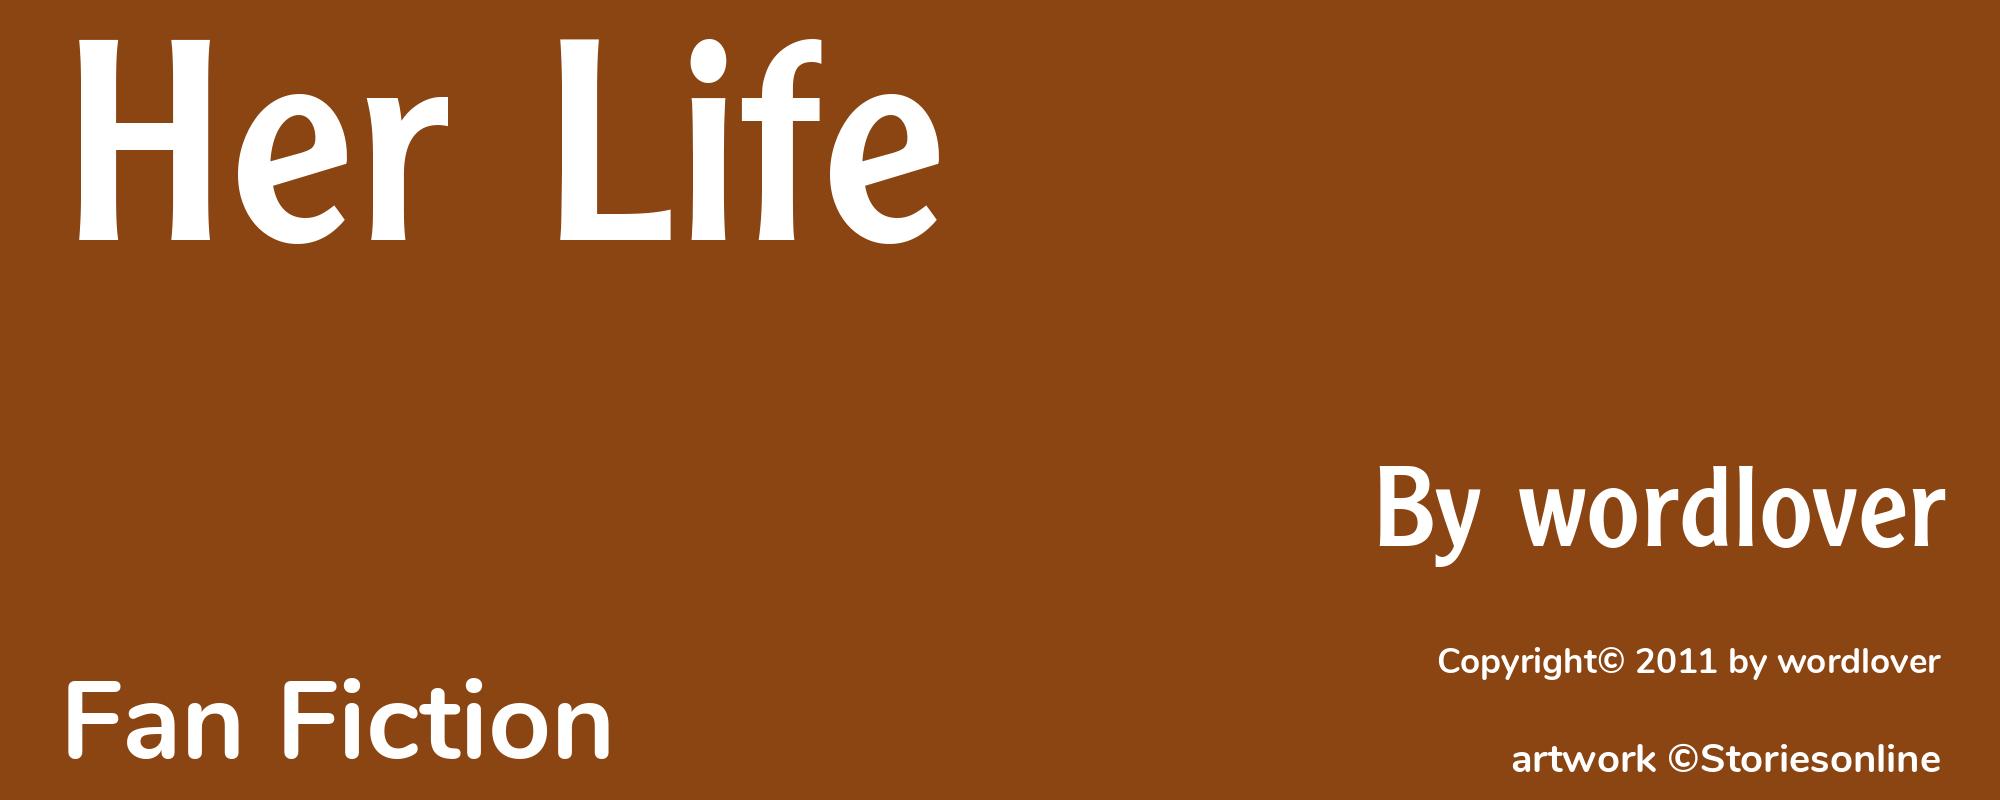 Her Life - Cover